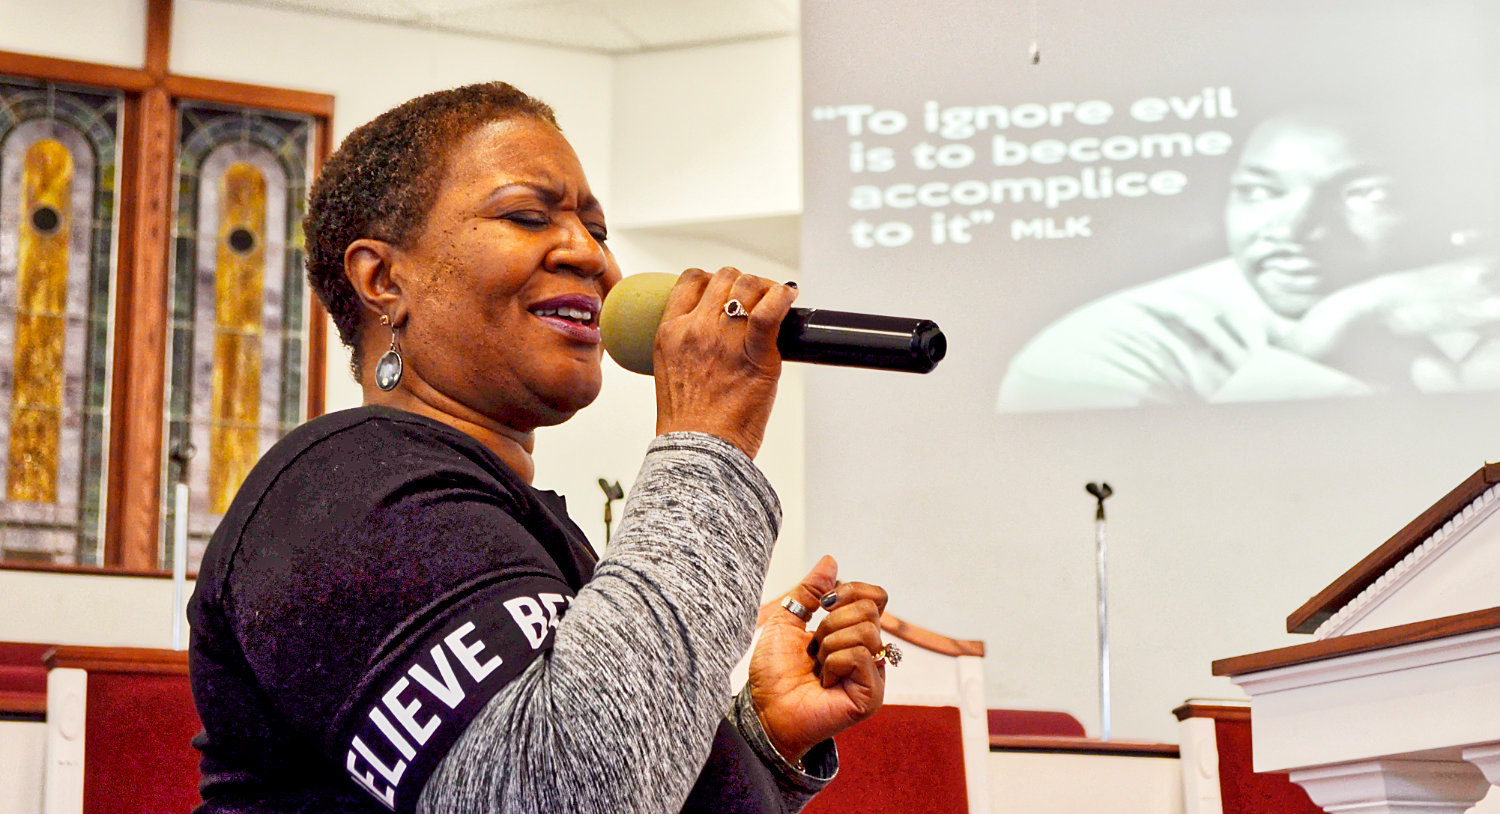 Sister Kathy Boyd sang heartfelt renditions of “Jesus Loves Me” and “Amazing Grace” at the St. Paul Missionary Baptist Church service honoring Dr. Martin Luther King Jr. Her unbridled passion for Christ could be felt as she sang about grace, liberty and love.